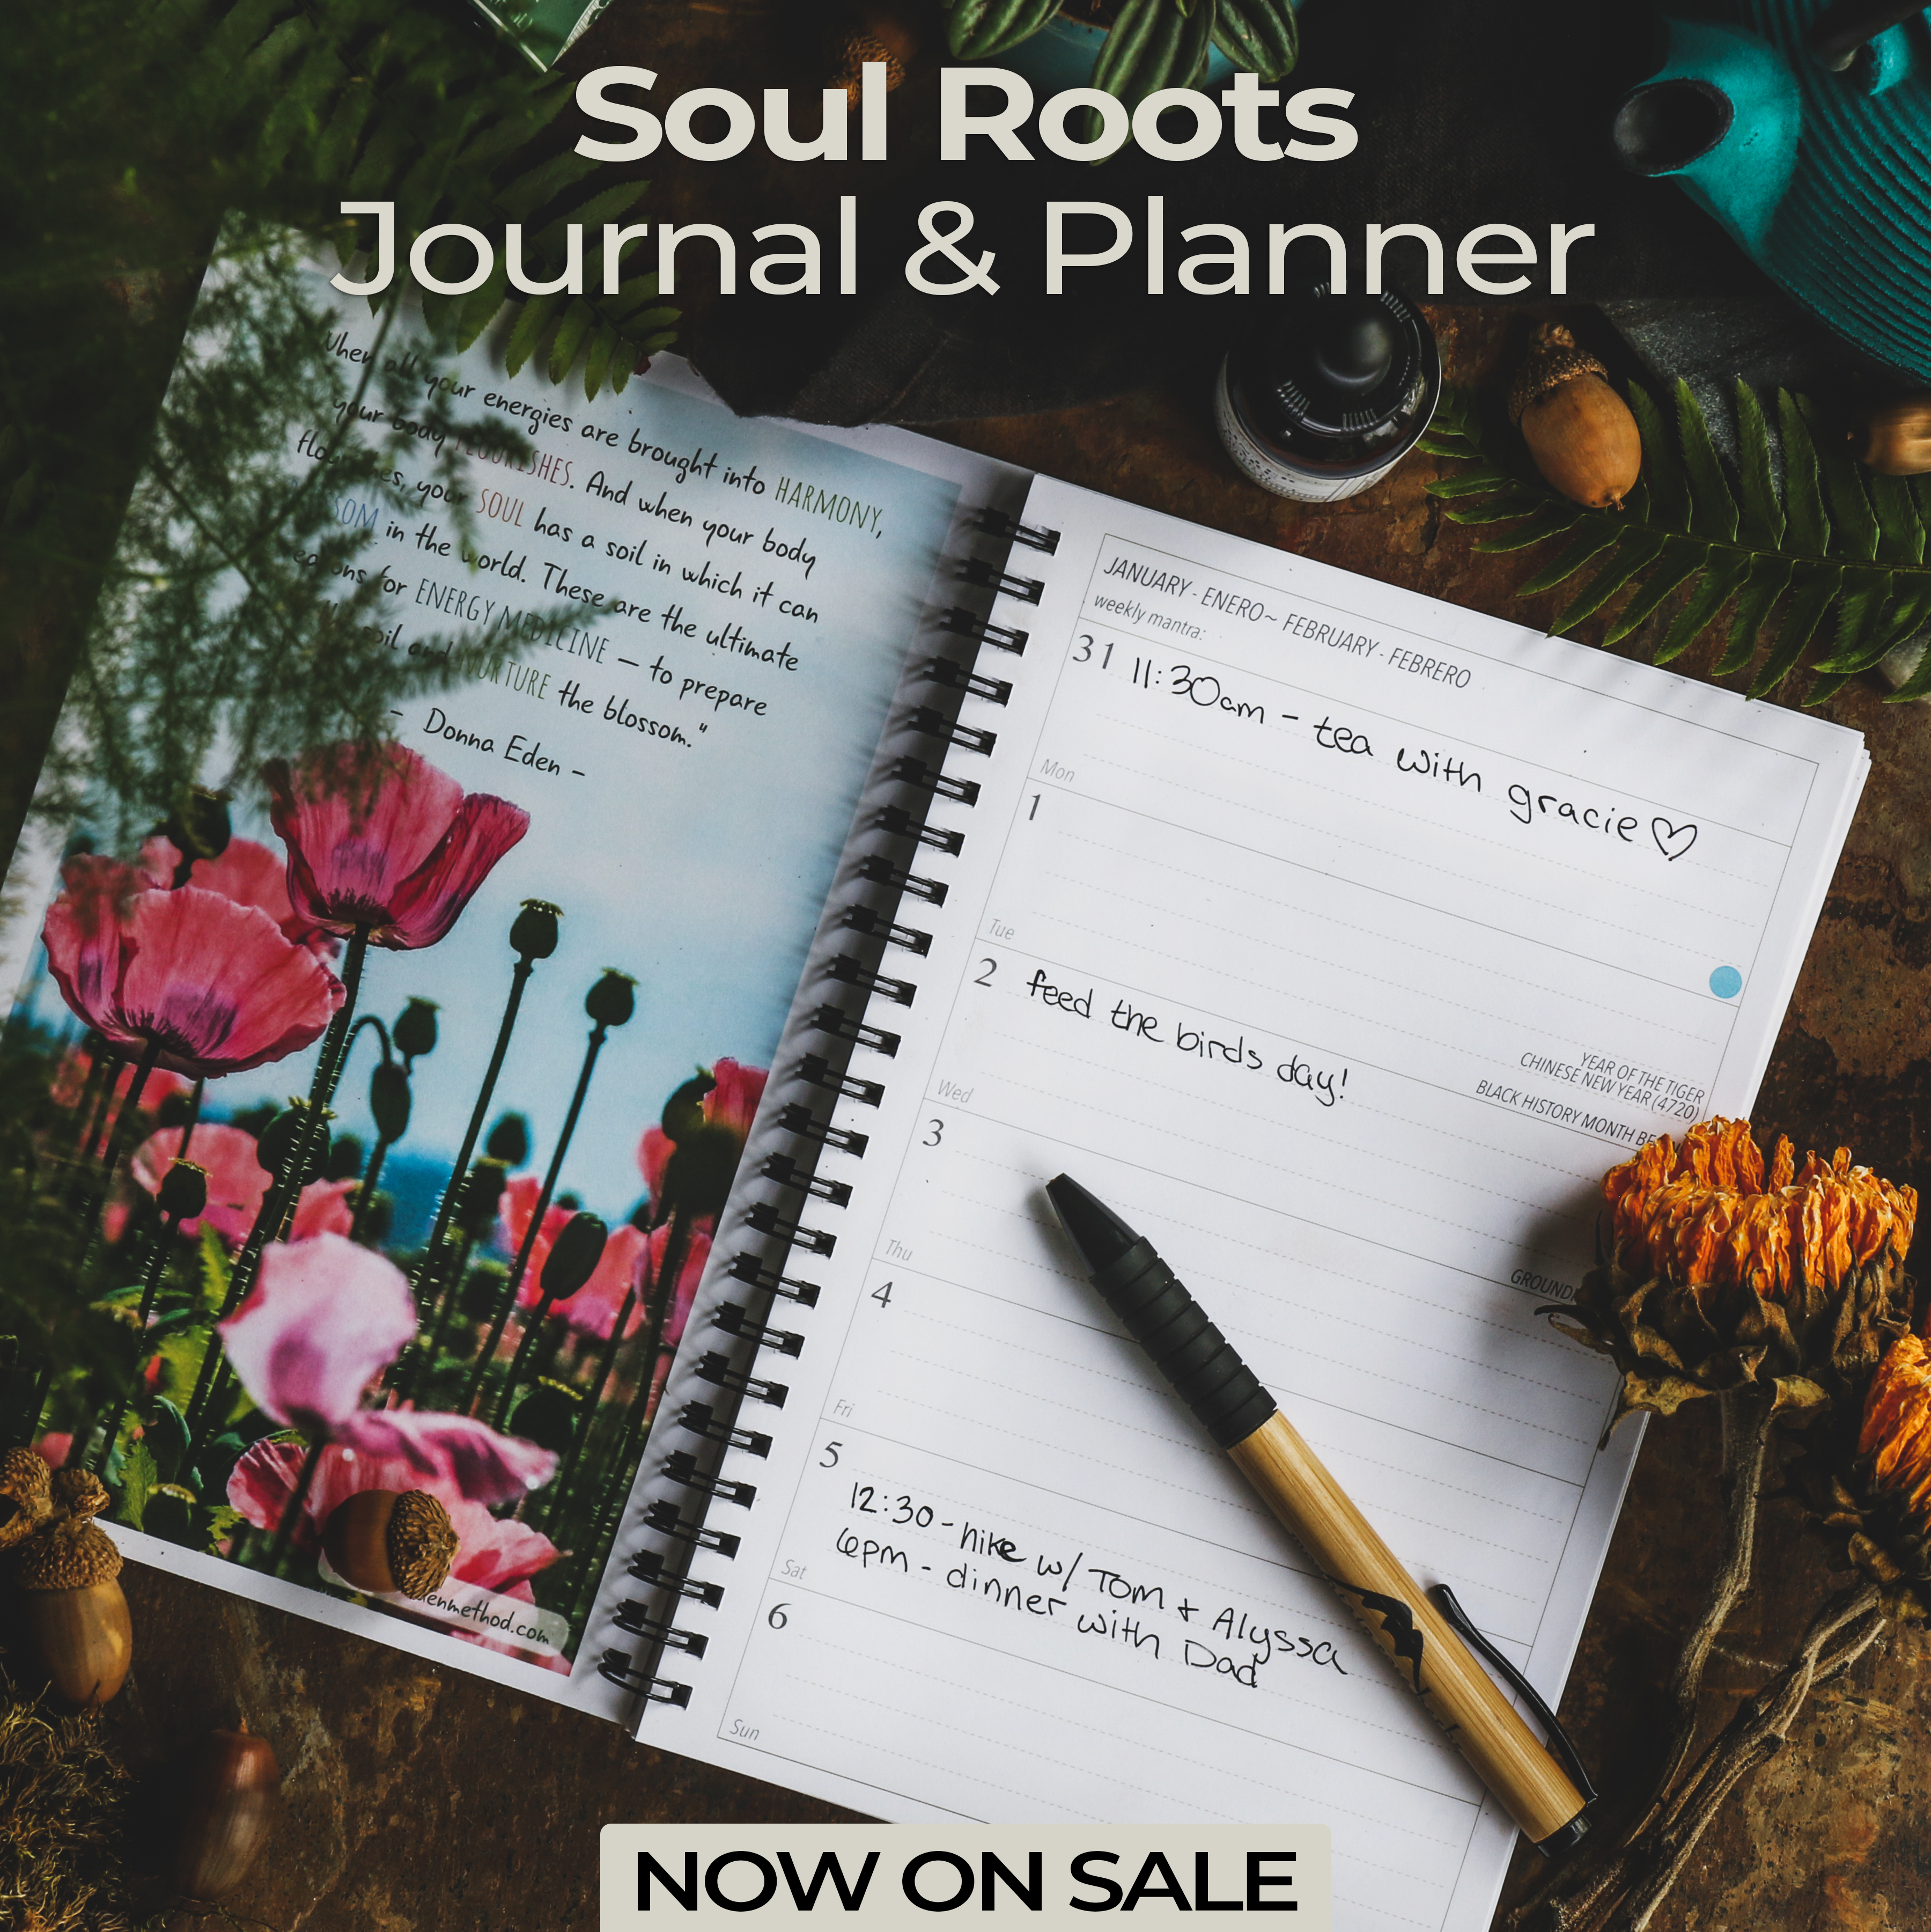 2022 Soul Roots Journal and Planner On Sale